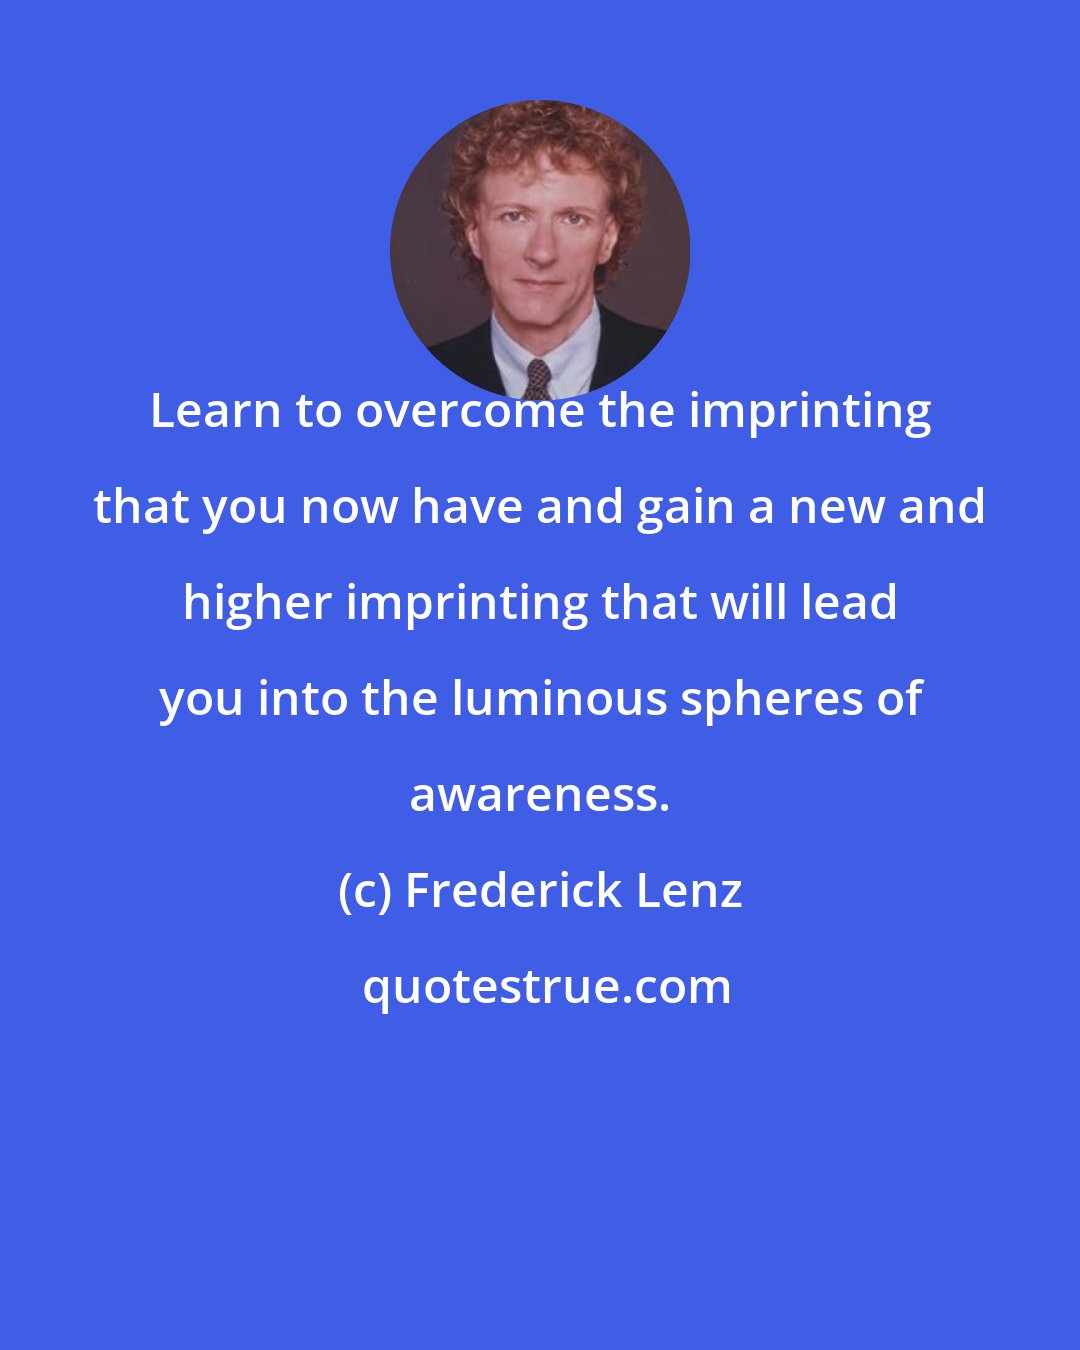 Frederick Lenz: Learn to overcome the imprinting that you now have and gain a new and higher imprinting that will lead you into the luminous spheres of awareness.